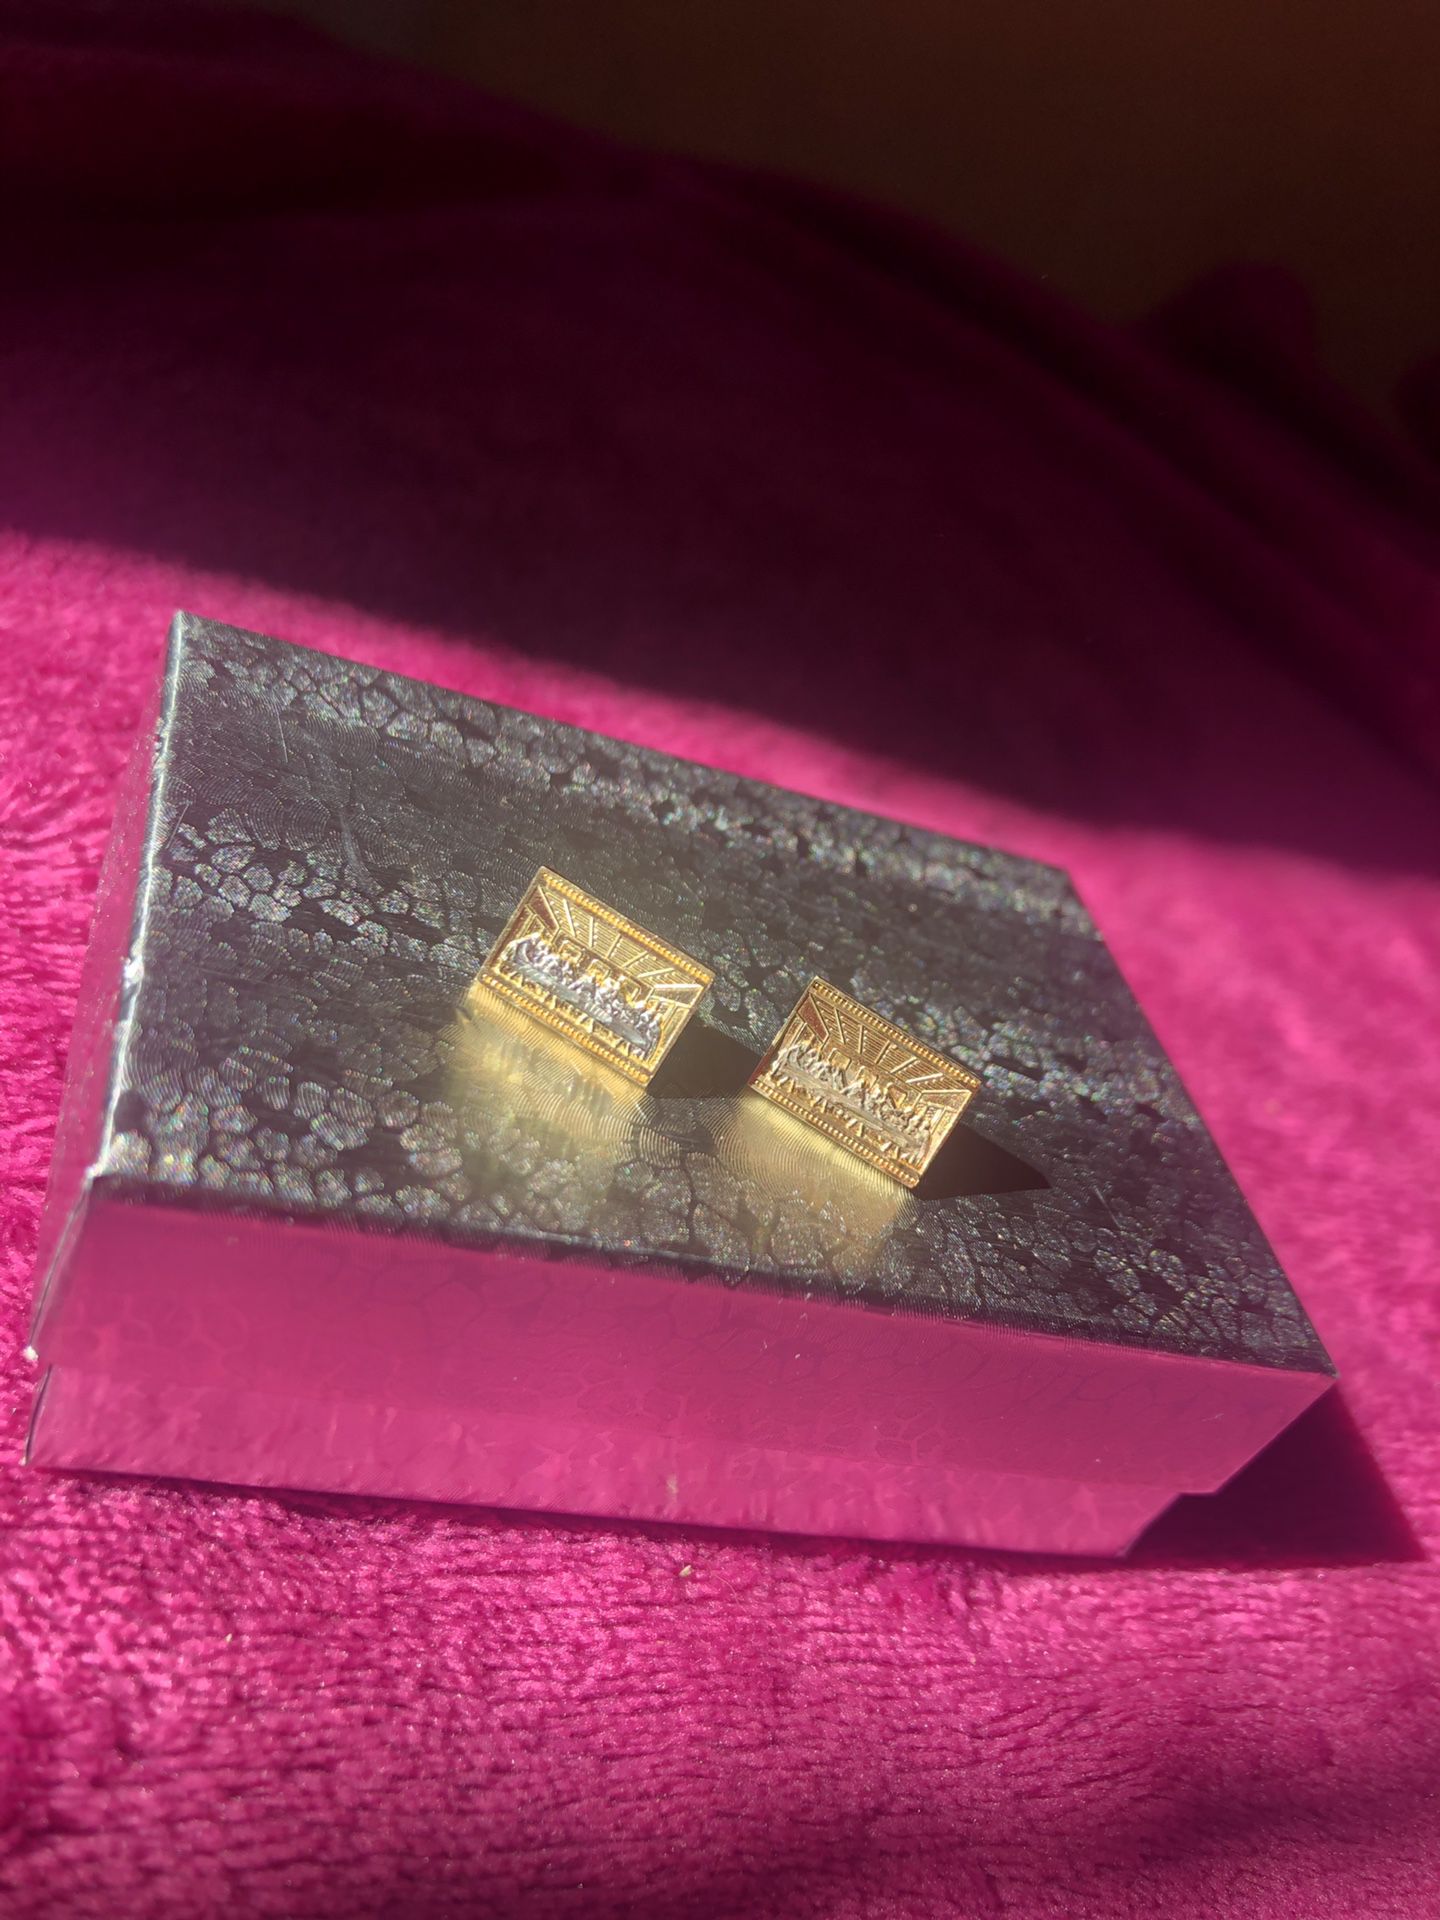 10k yellow & white “The Last Supper” Gold earrings